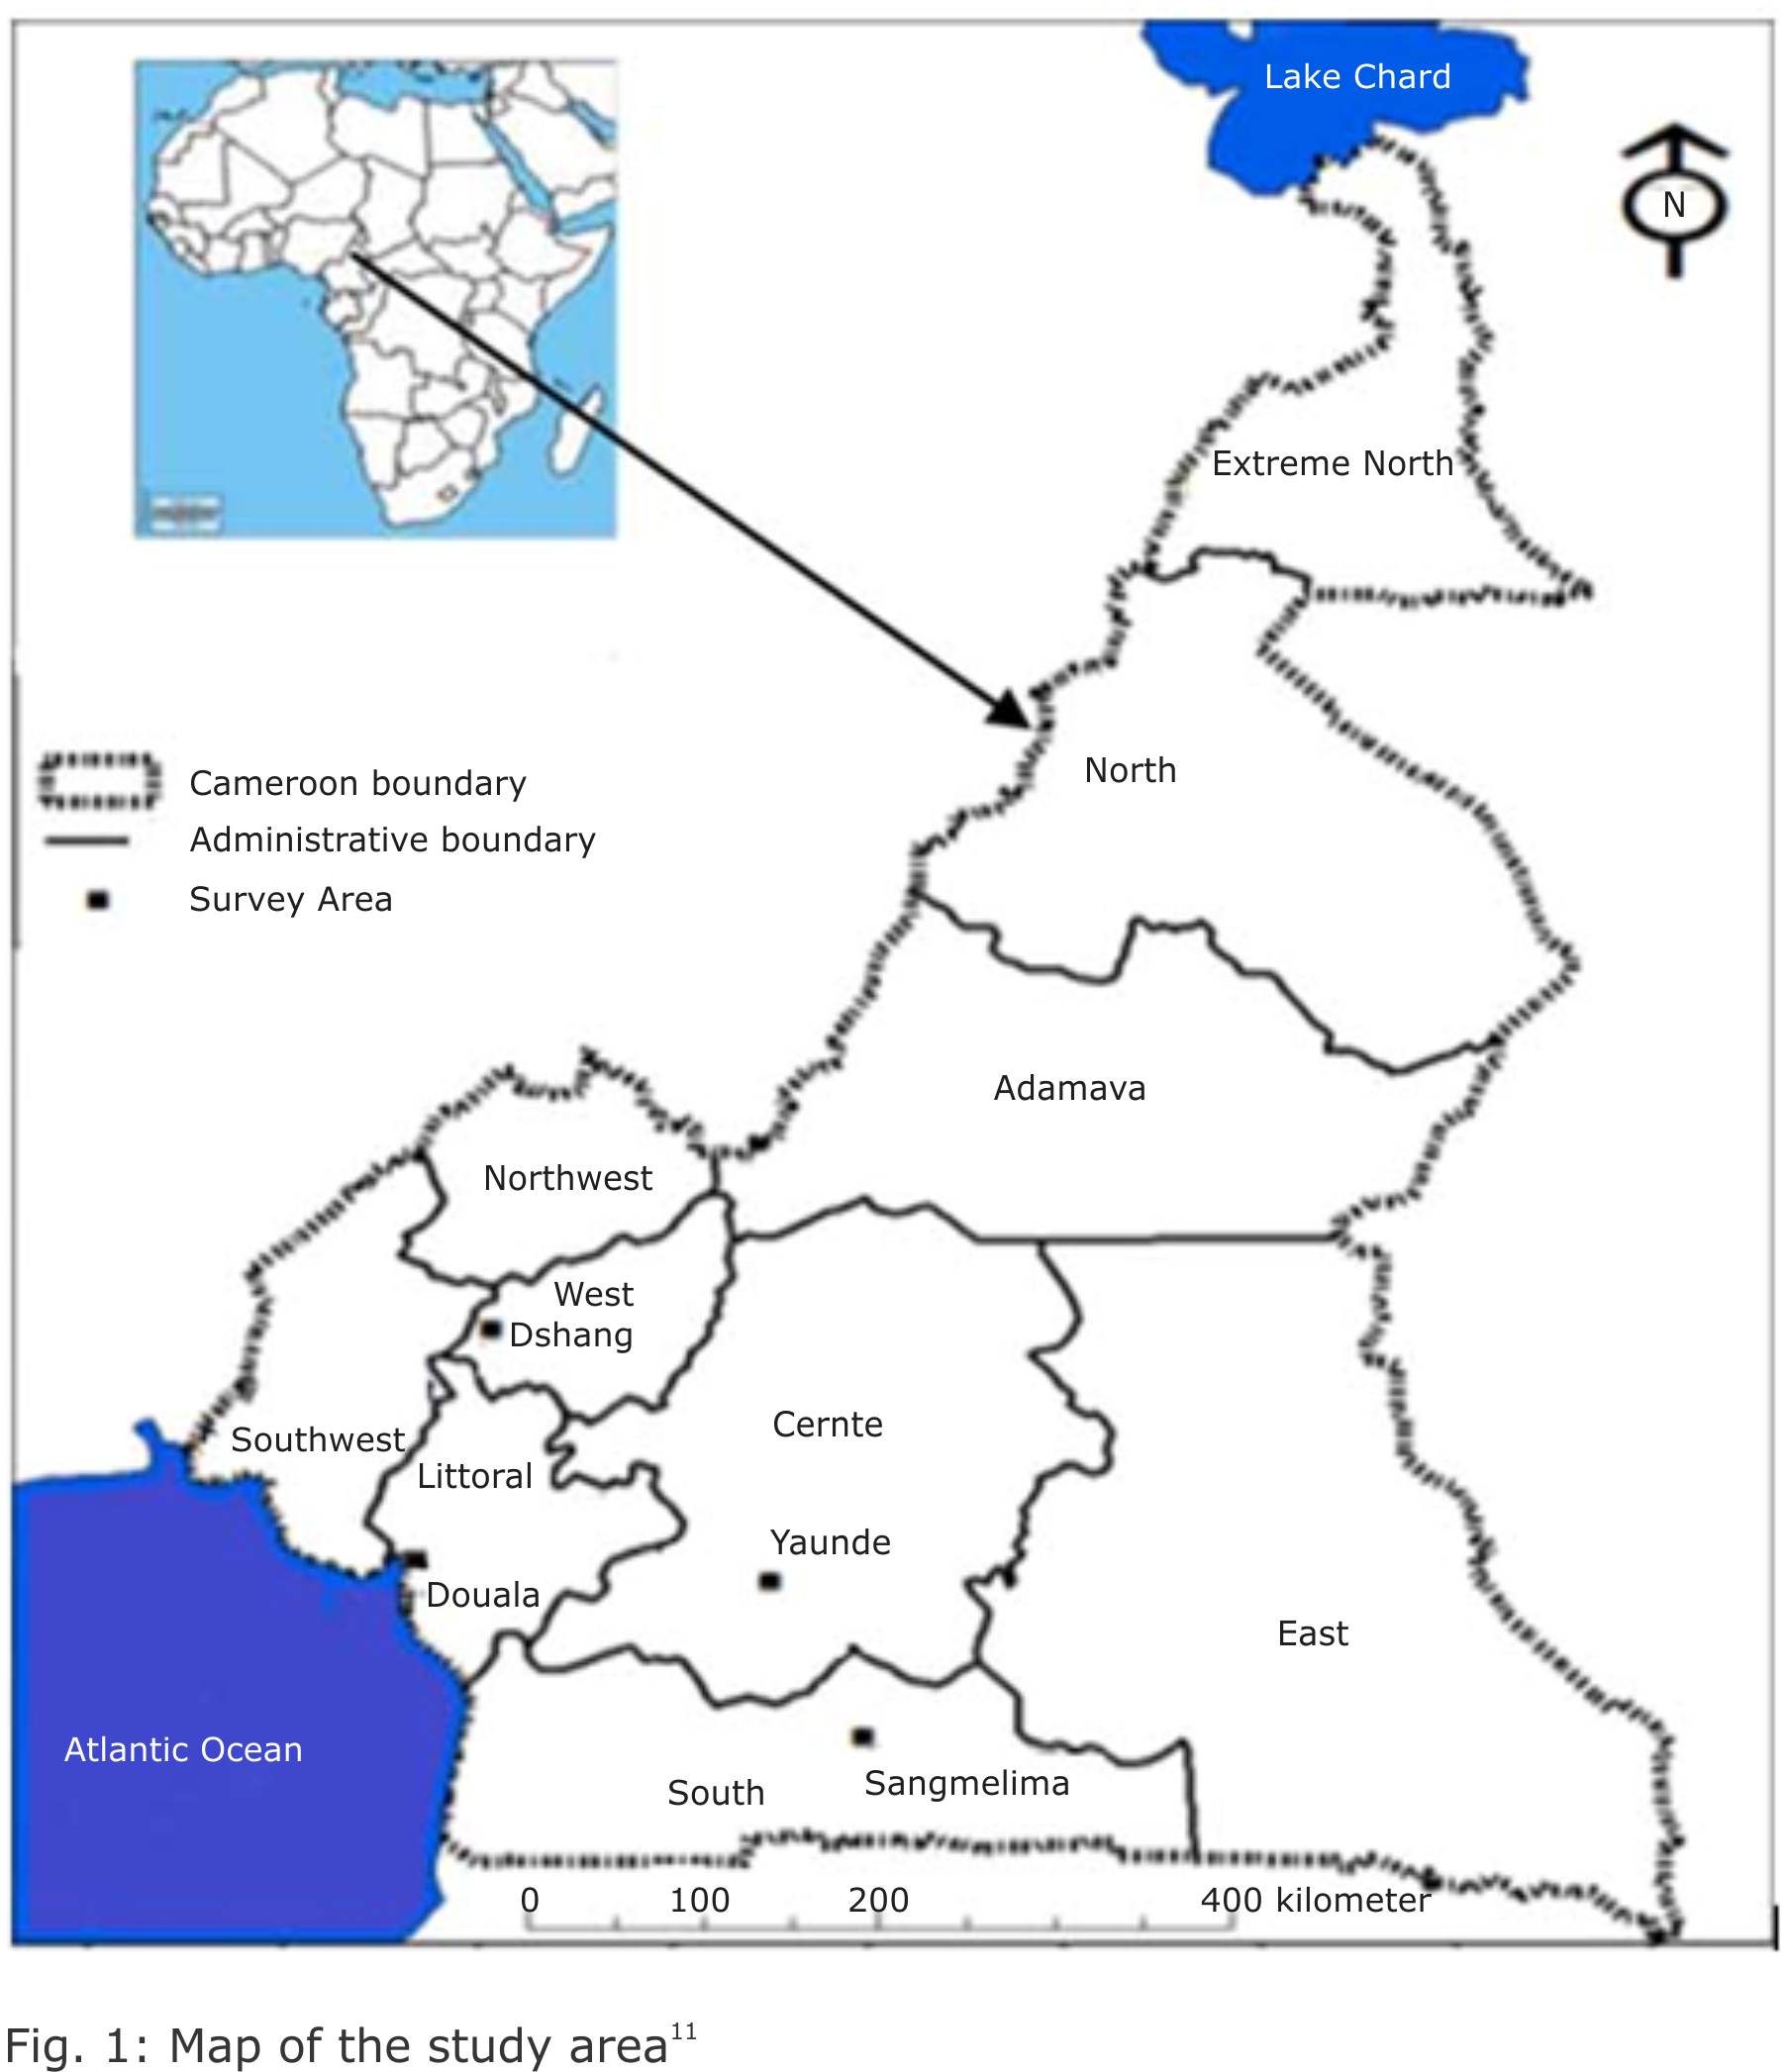 Image for - Chicken Farming Practices and Occurrence of Antimicrobial Resistance in Four Regions of Cameroon